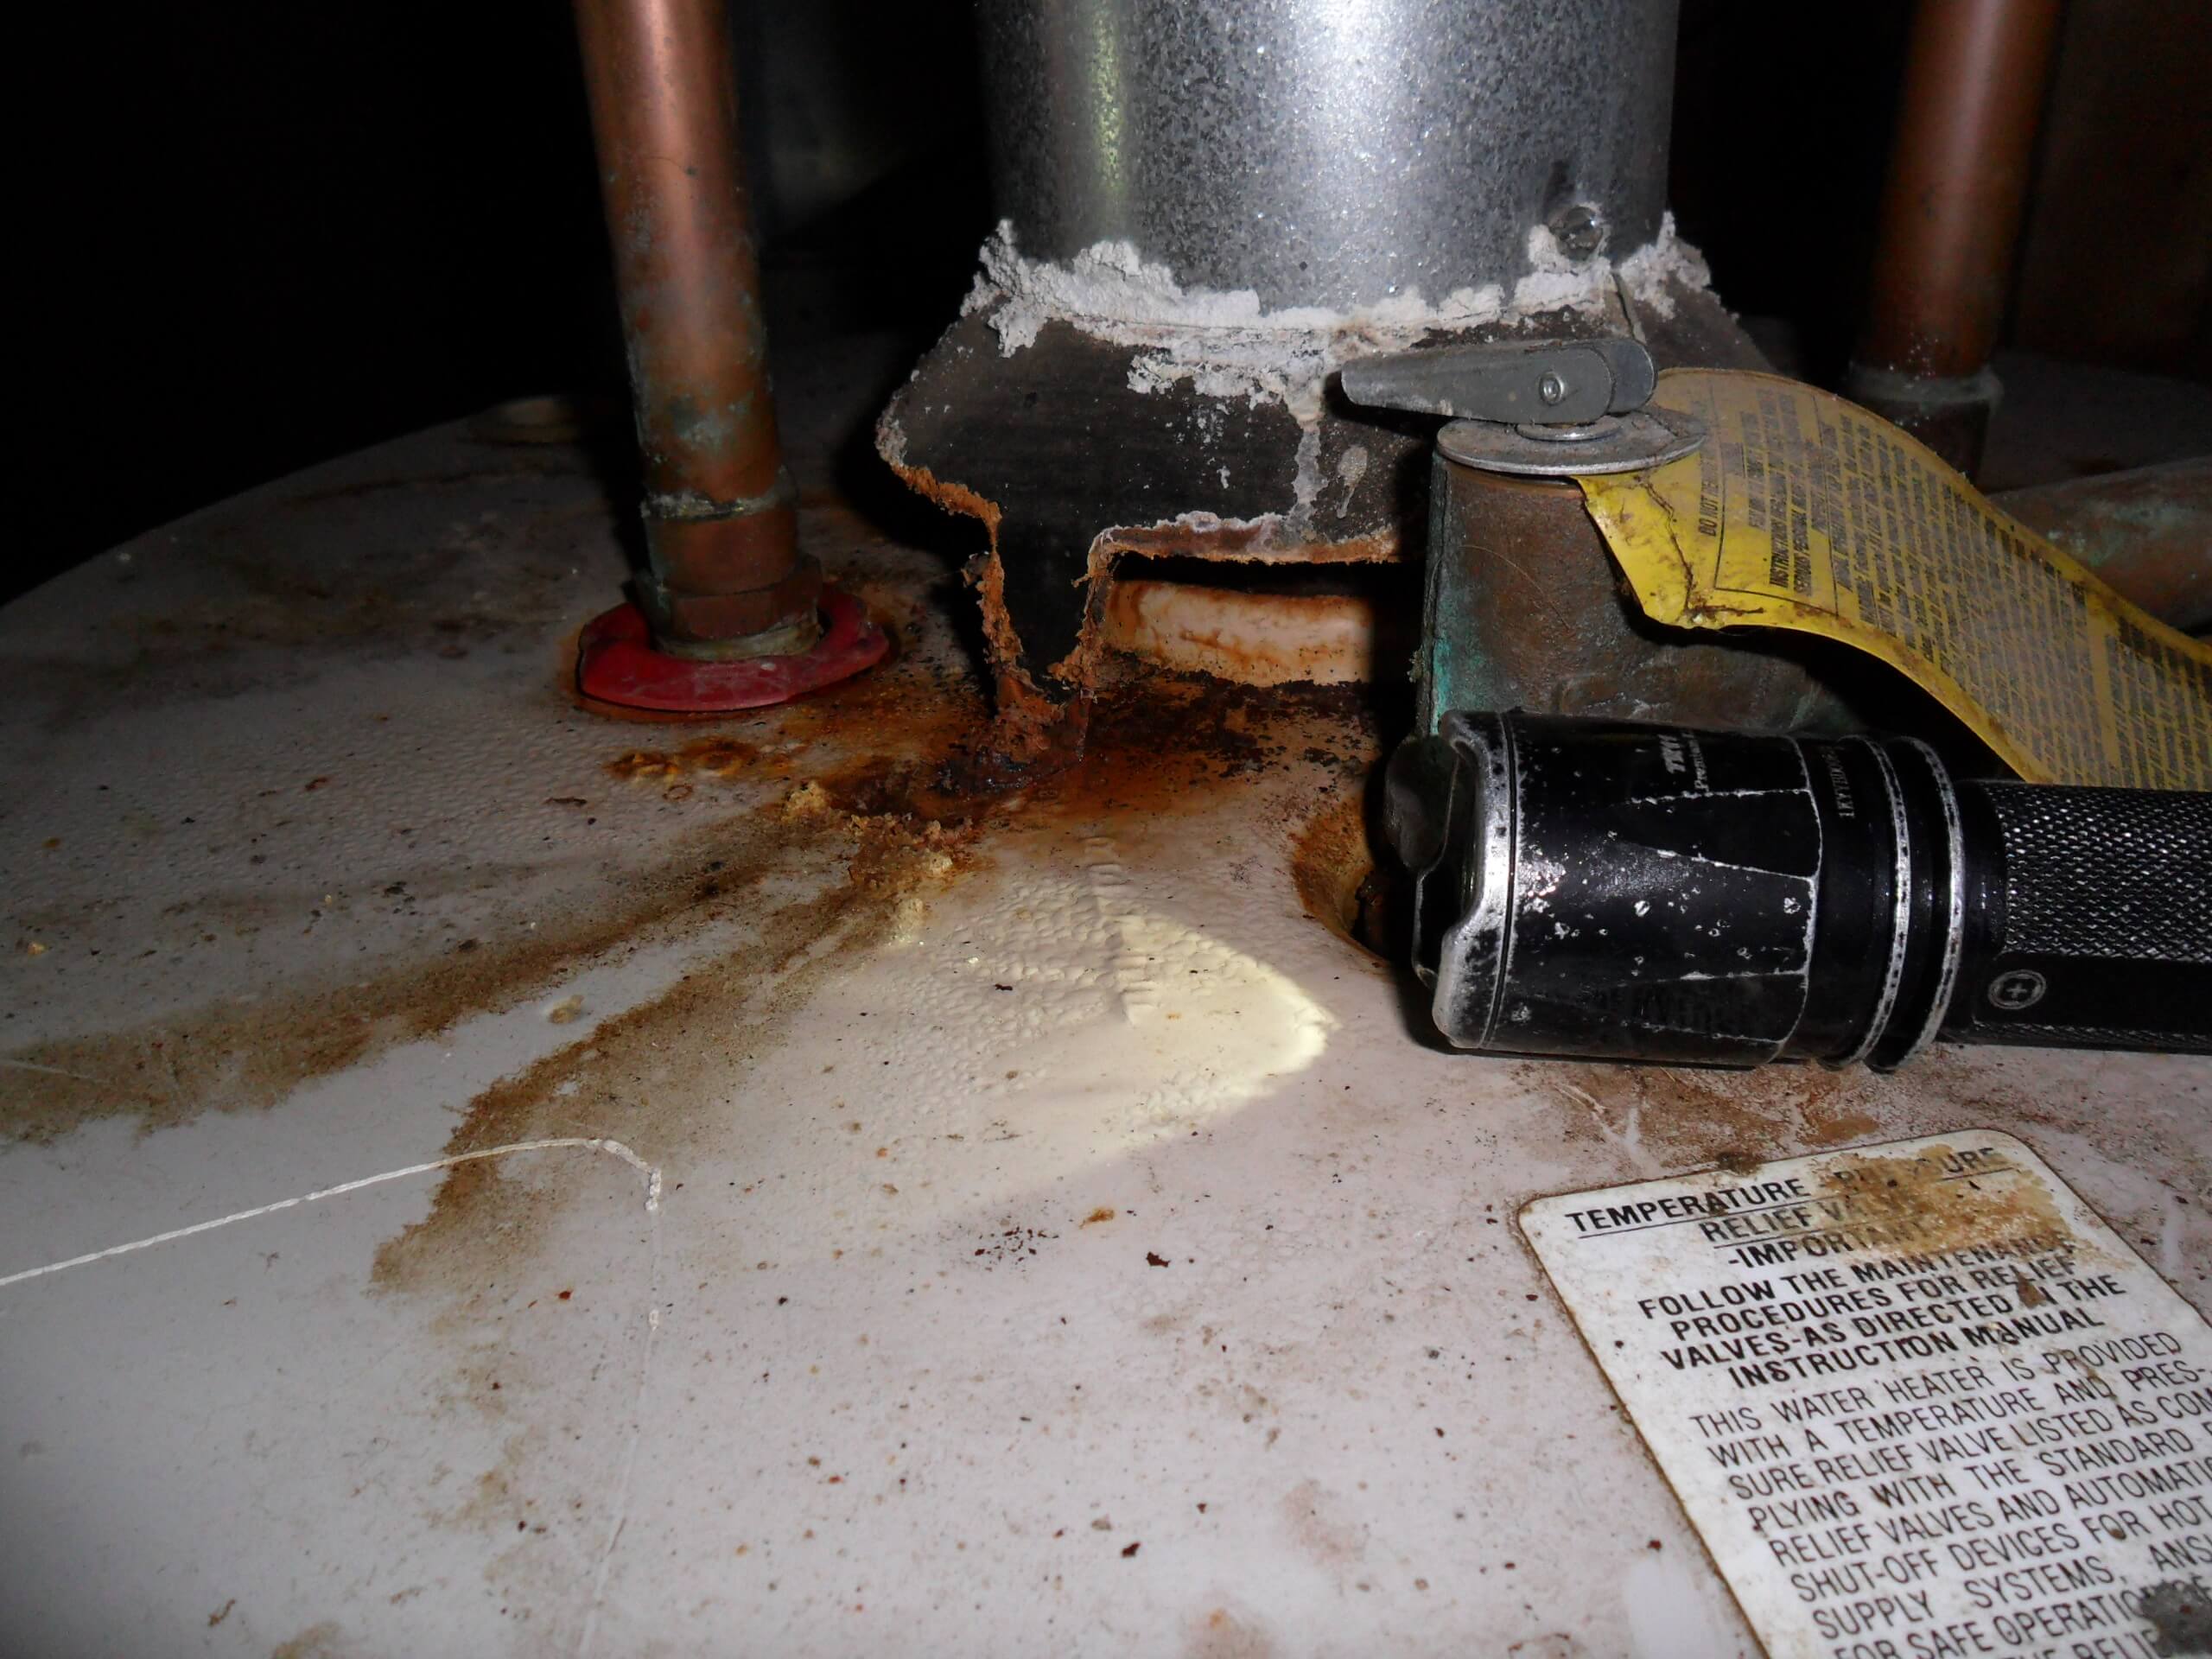 Water Heater Backdrafting, Part 1 of 2: Why it Matters and What to Look For